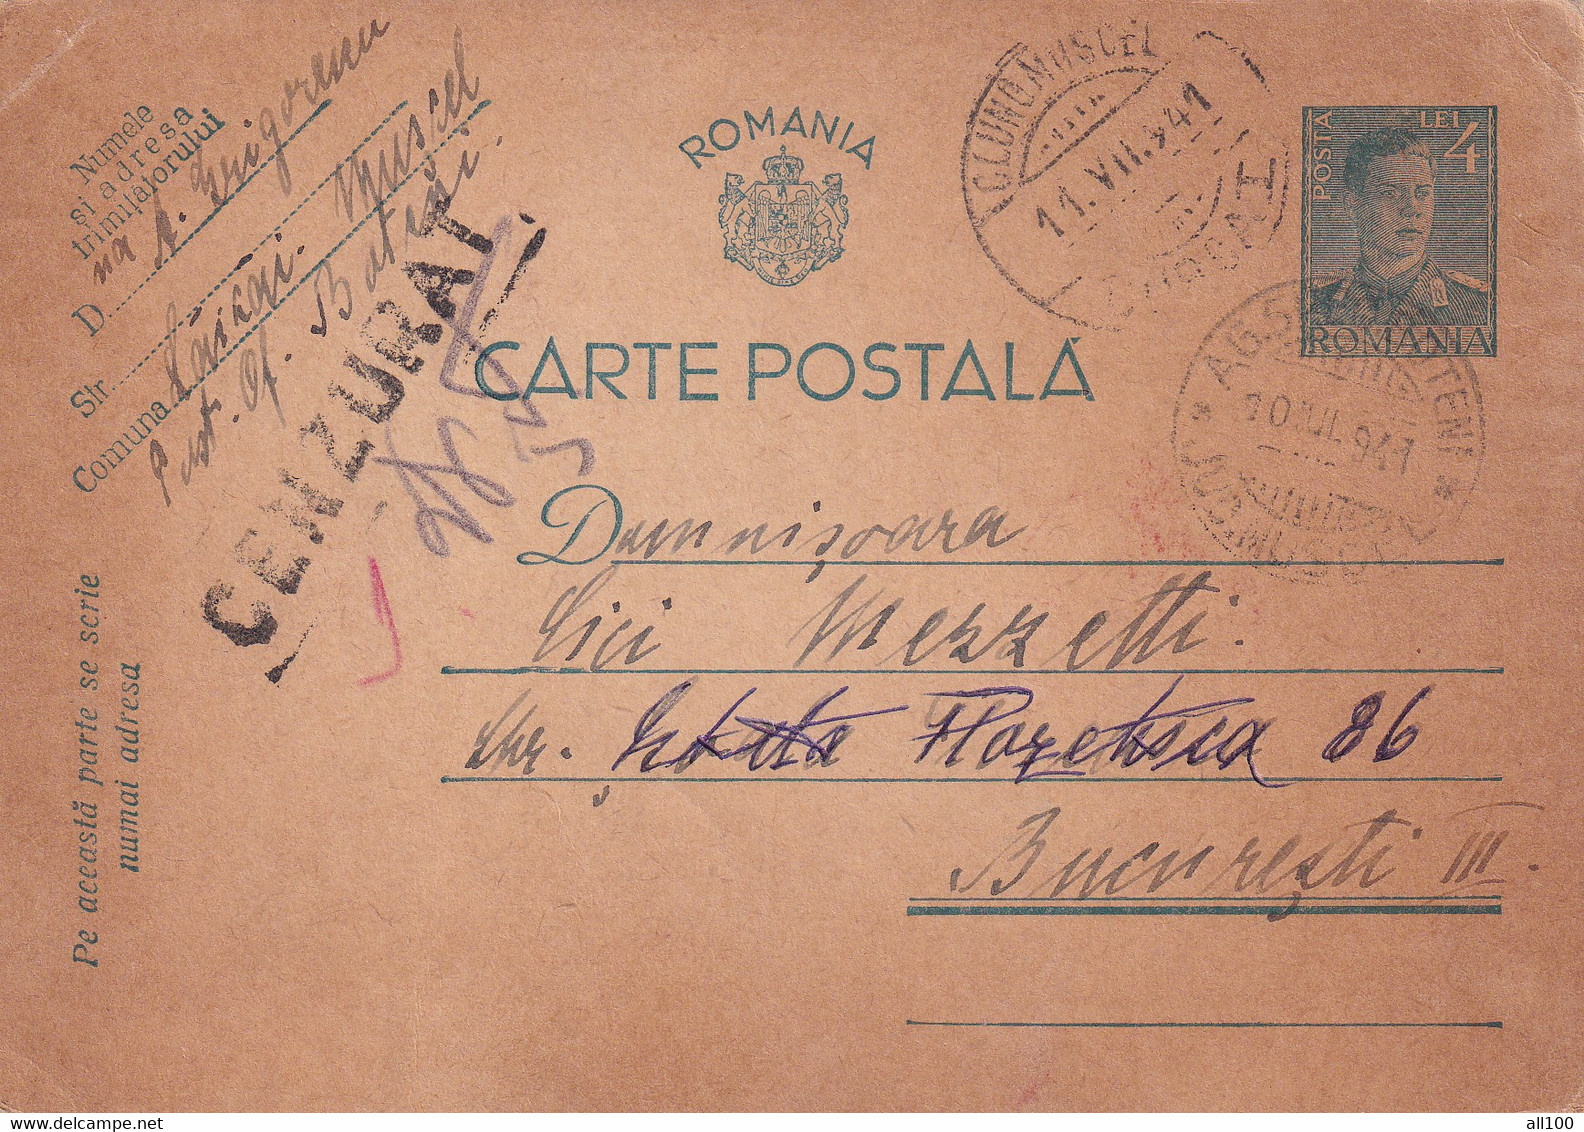 A16460 - MILITARY LETTER  POSTAL STATIONERY CENZORED CAMPULUNG MUSCEL  KING MICHAEL 4 LEI 1941 - World War 2 Letters